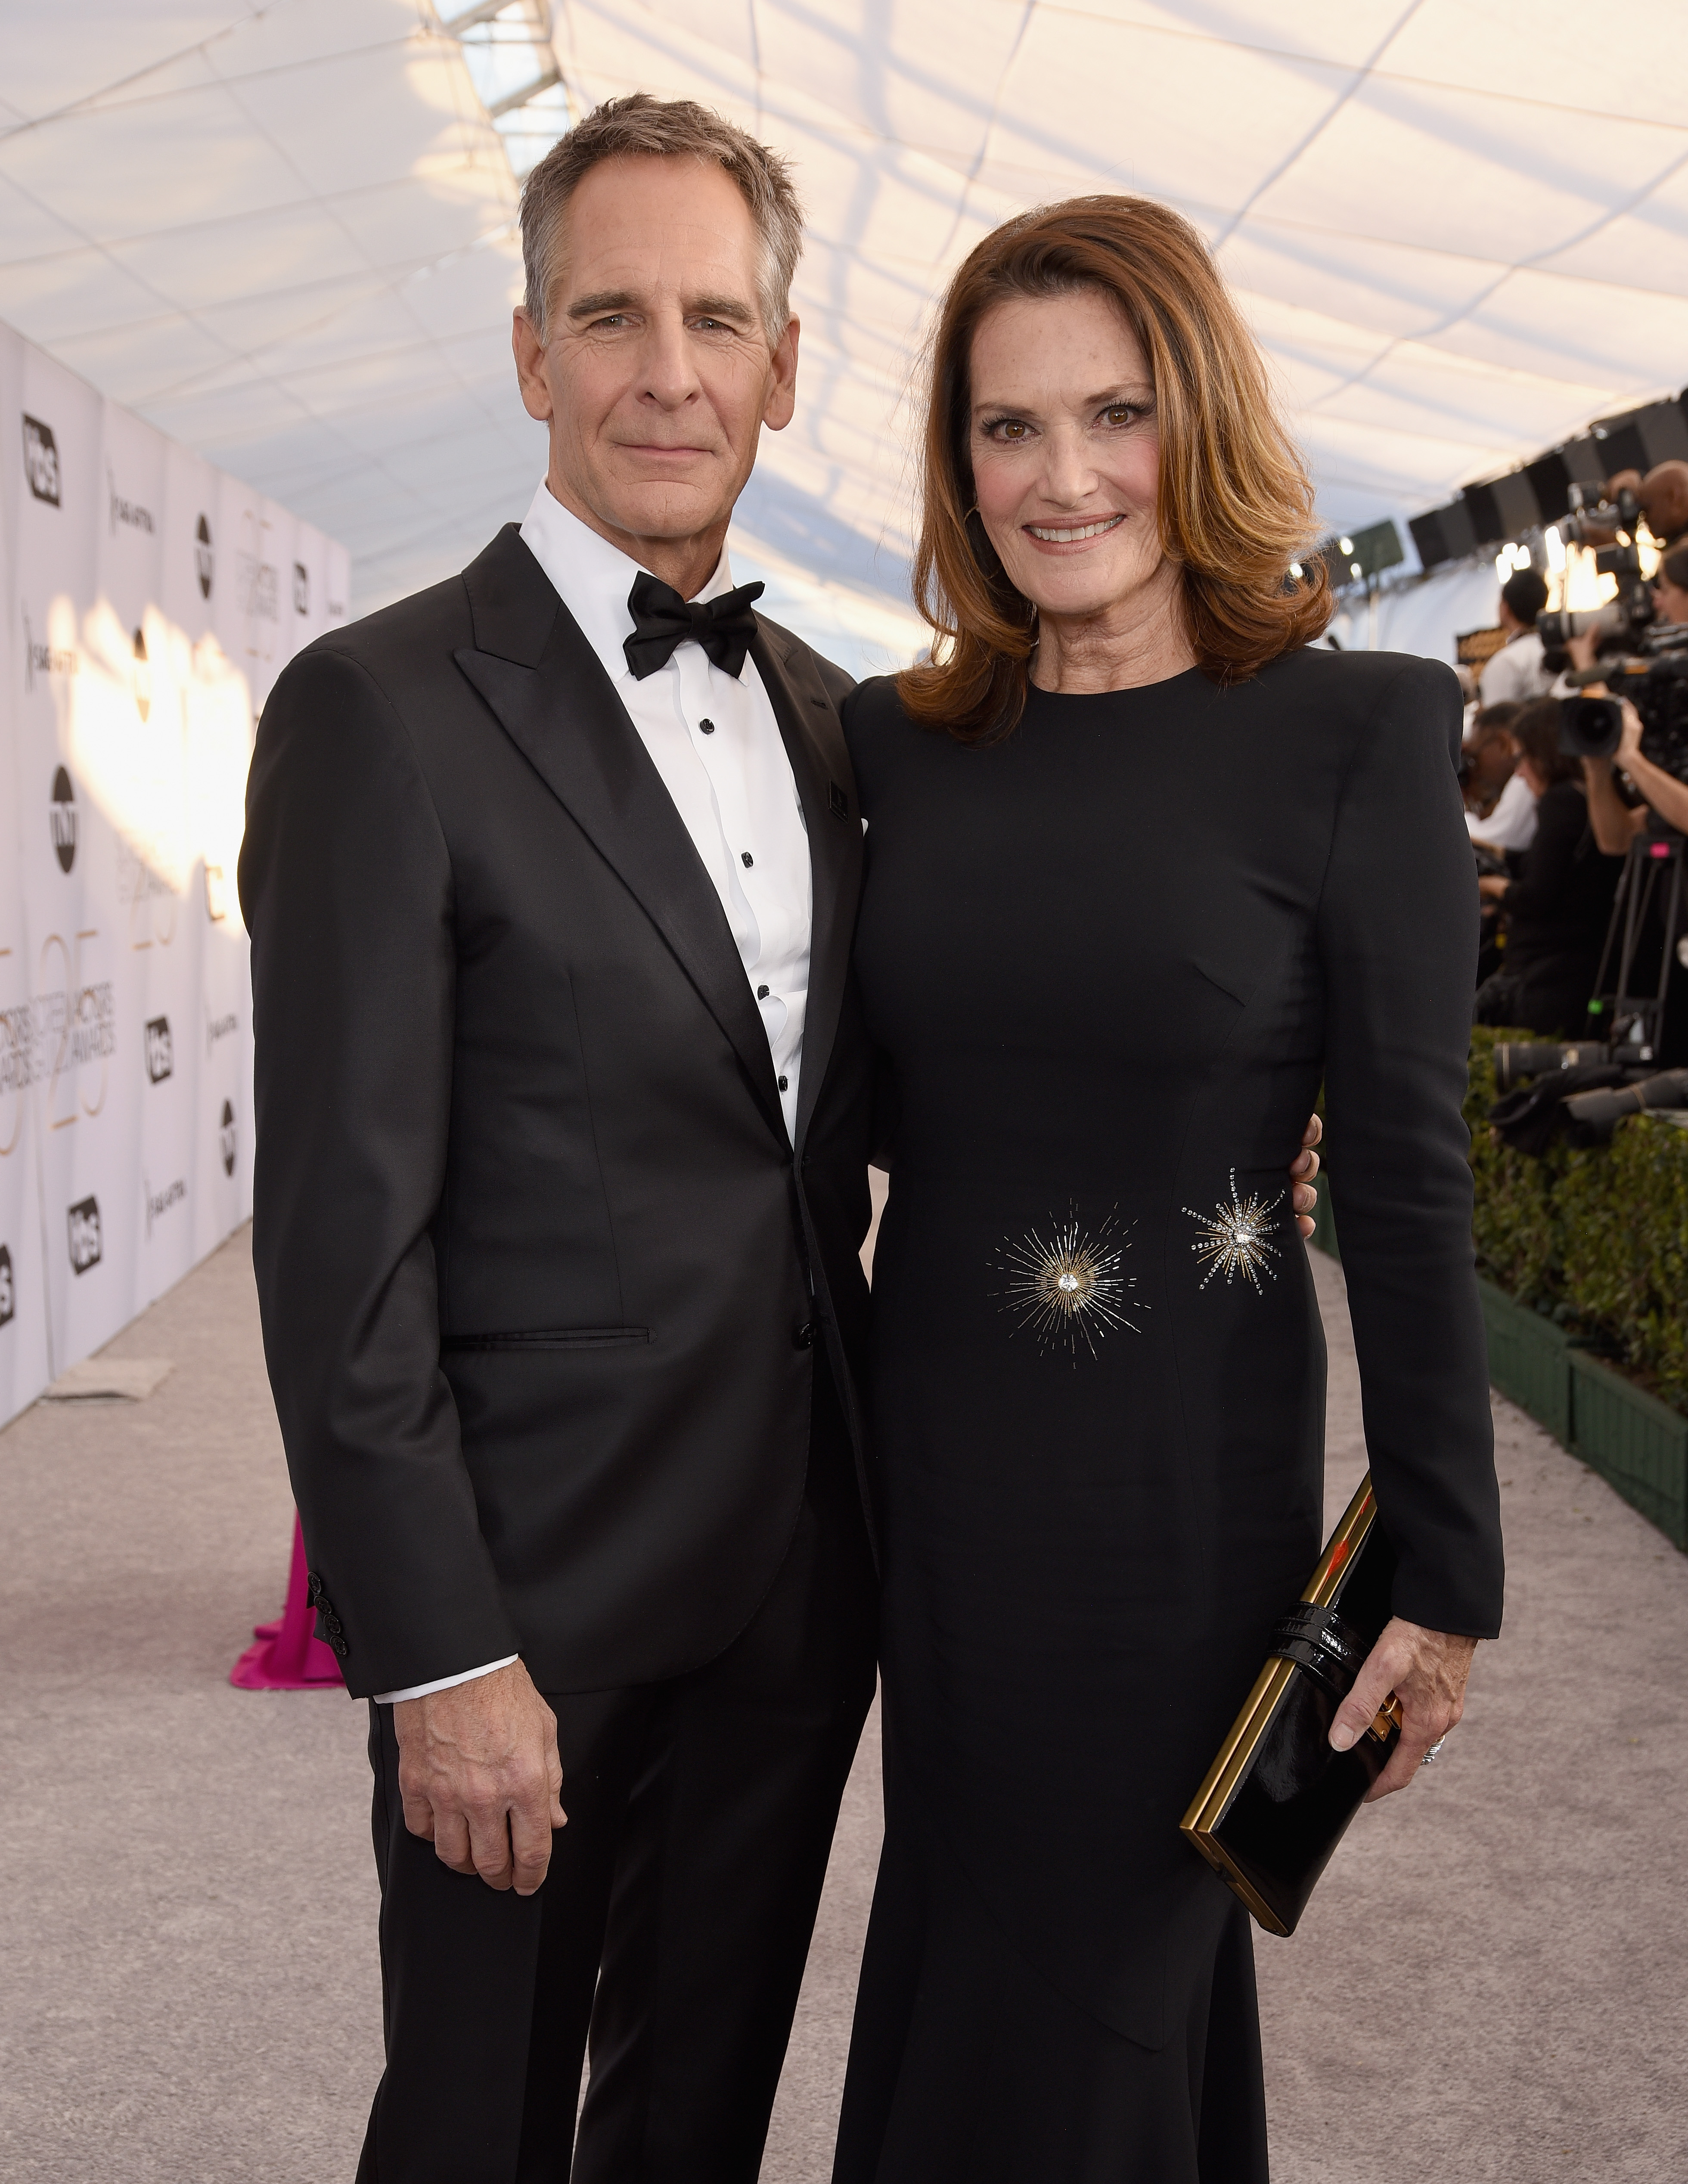 Scott Bakula and Chelsea Field attend the 25th Annual Screen Actors Guild Awards at The Shrine Auditorium on January 27, 2019 in Los Angeles, California. | Source: Getty Images